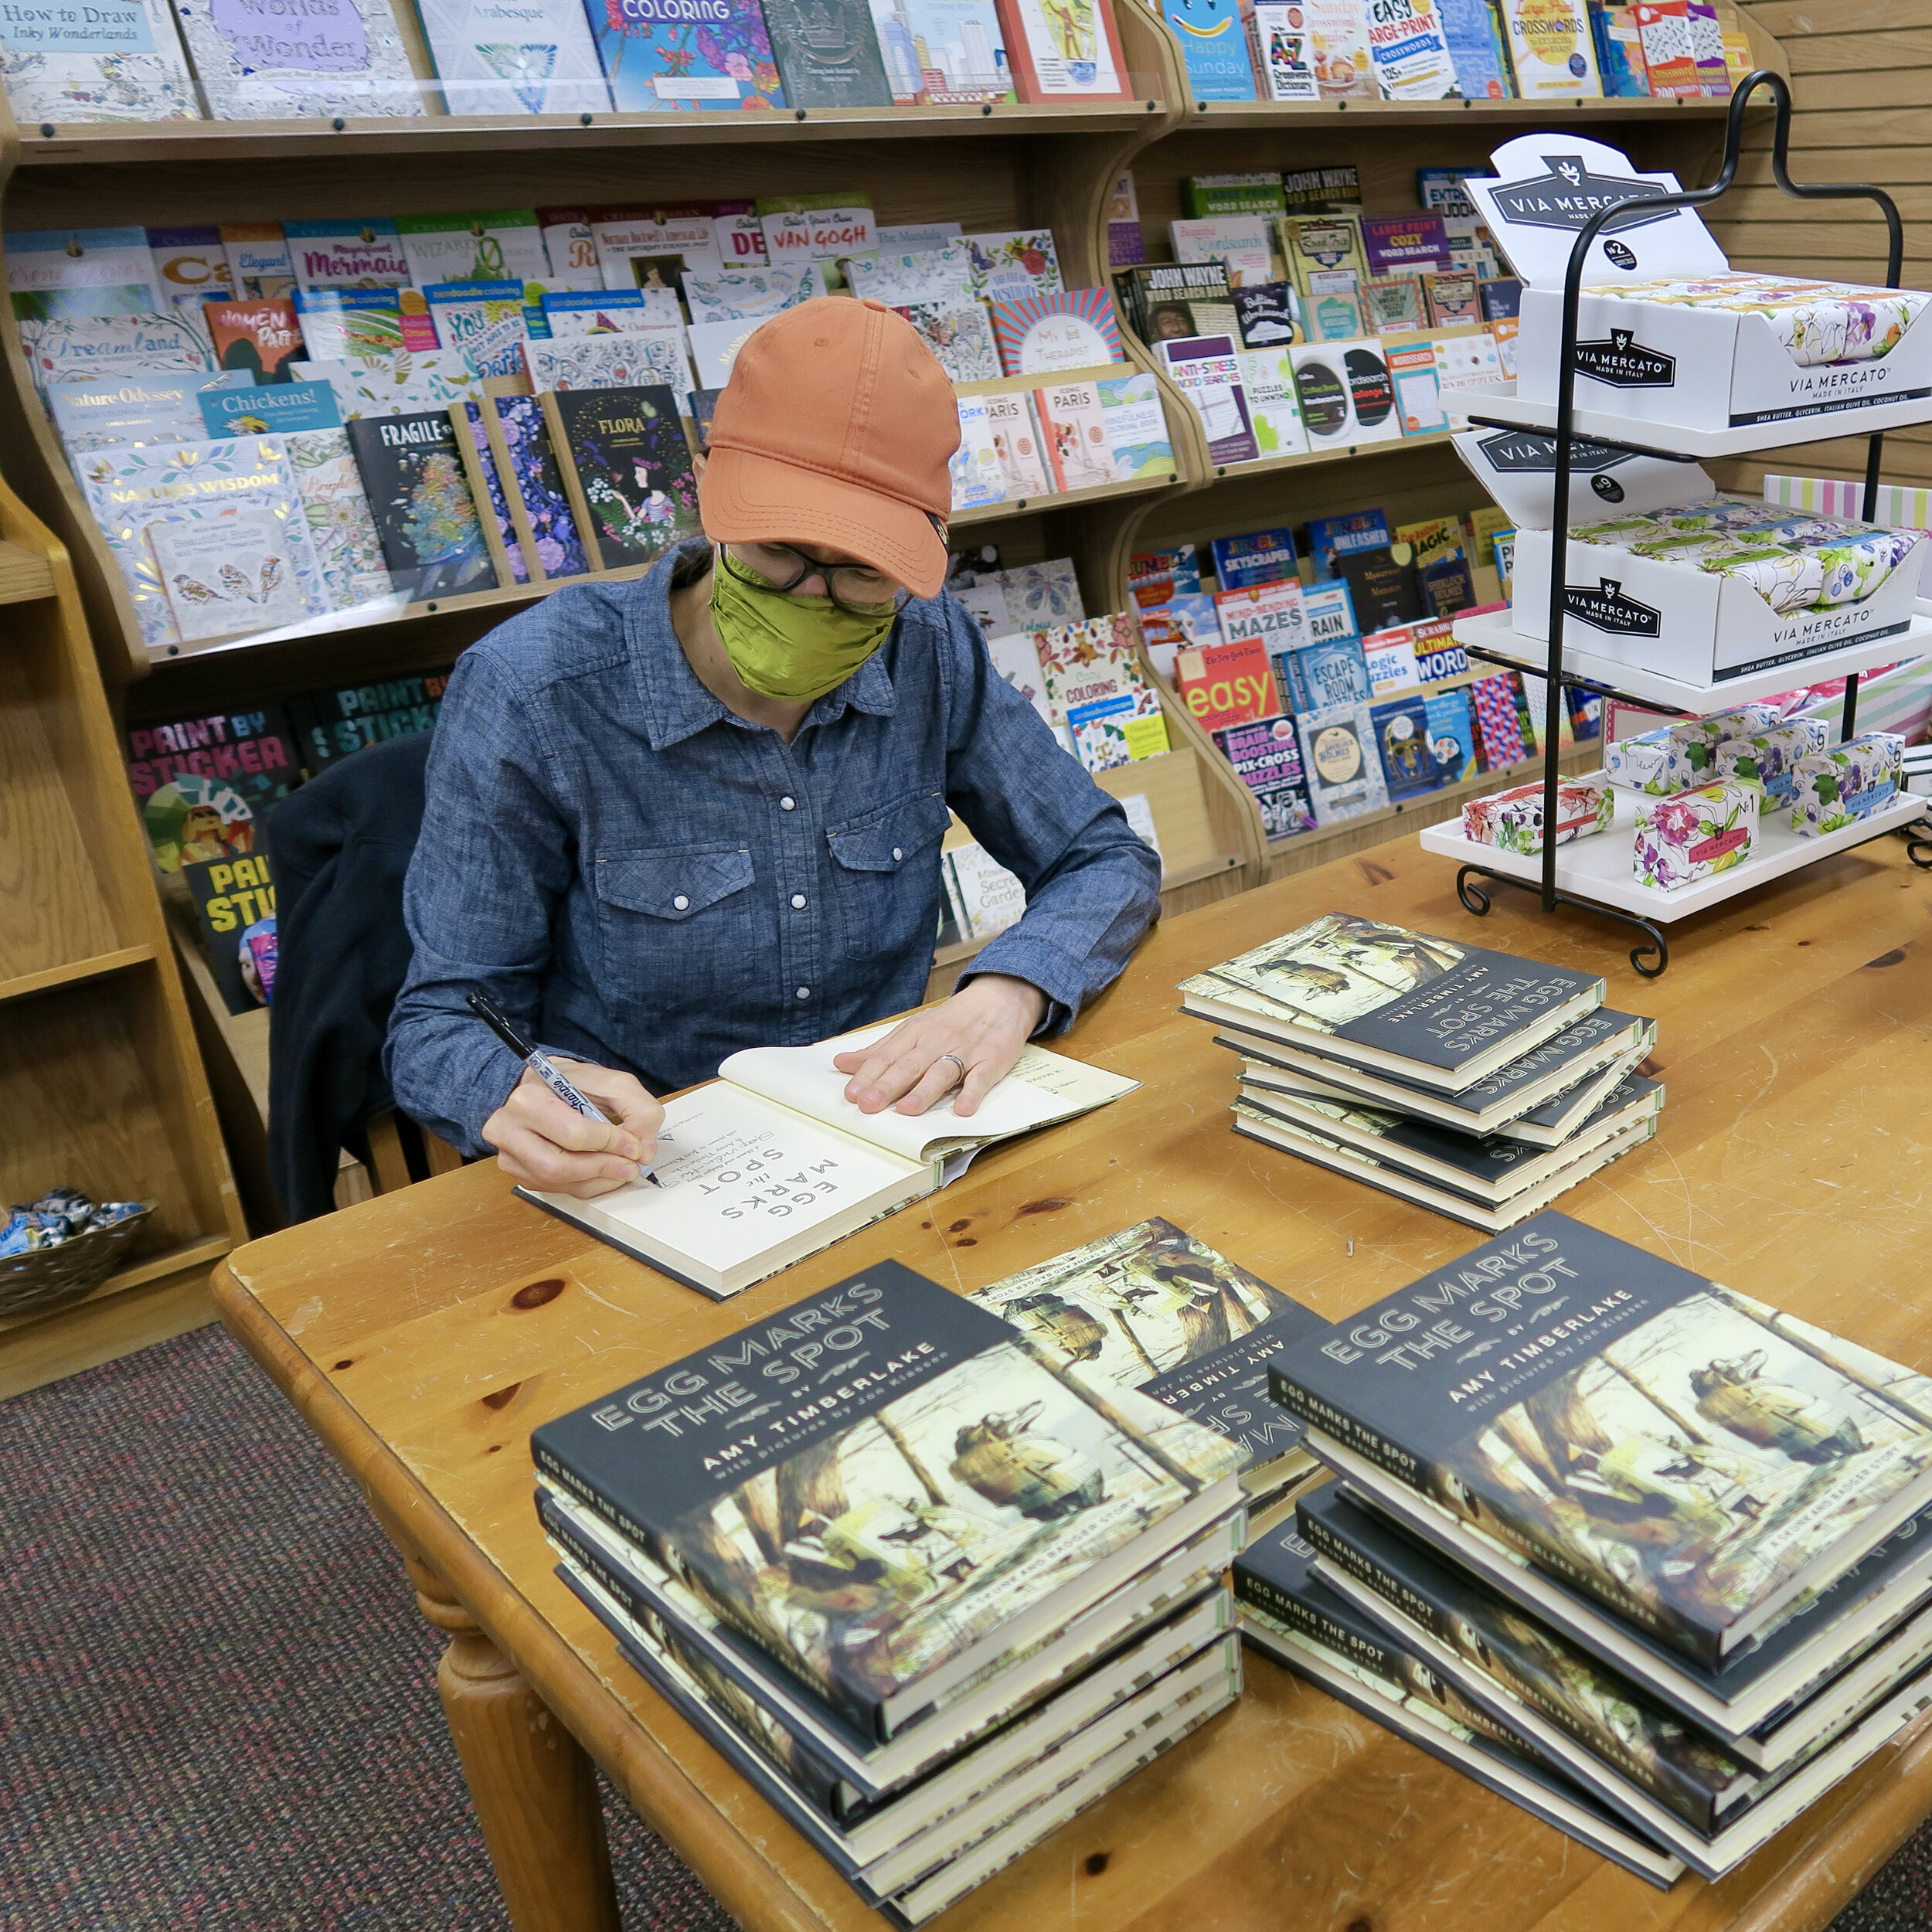 9/28/21 Signing EGG stock at Anderson's in Naperville, Illinois